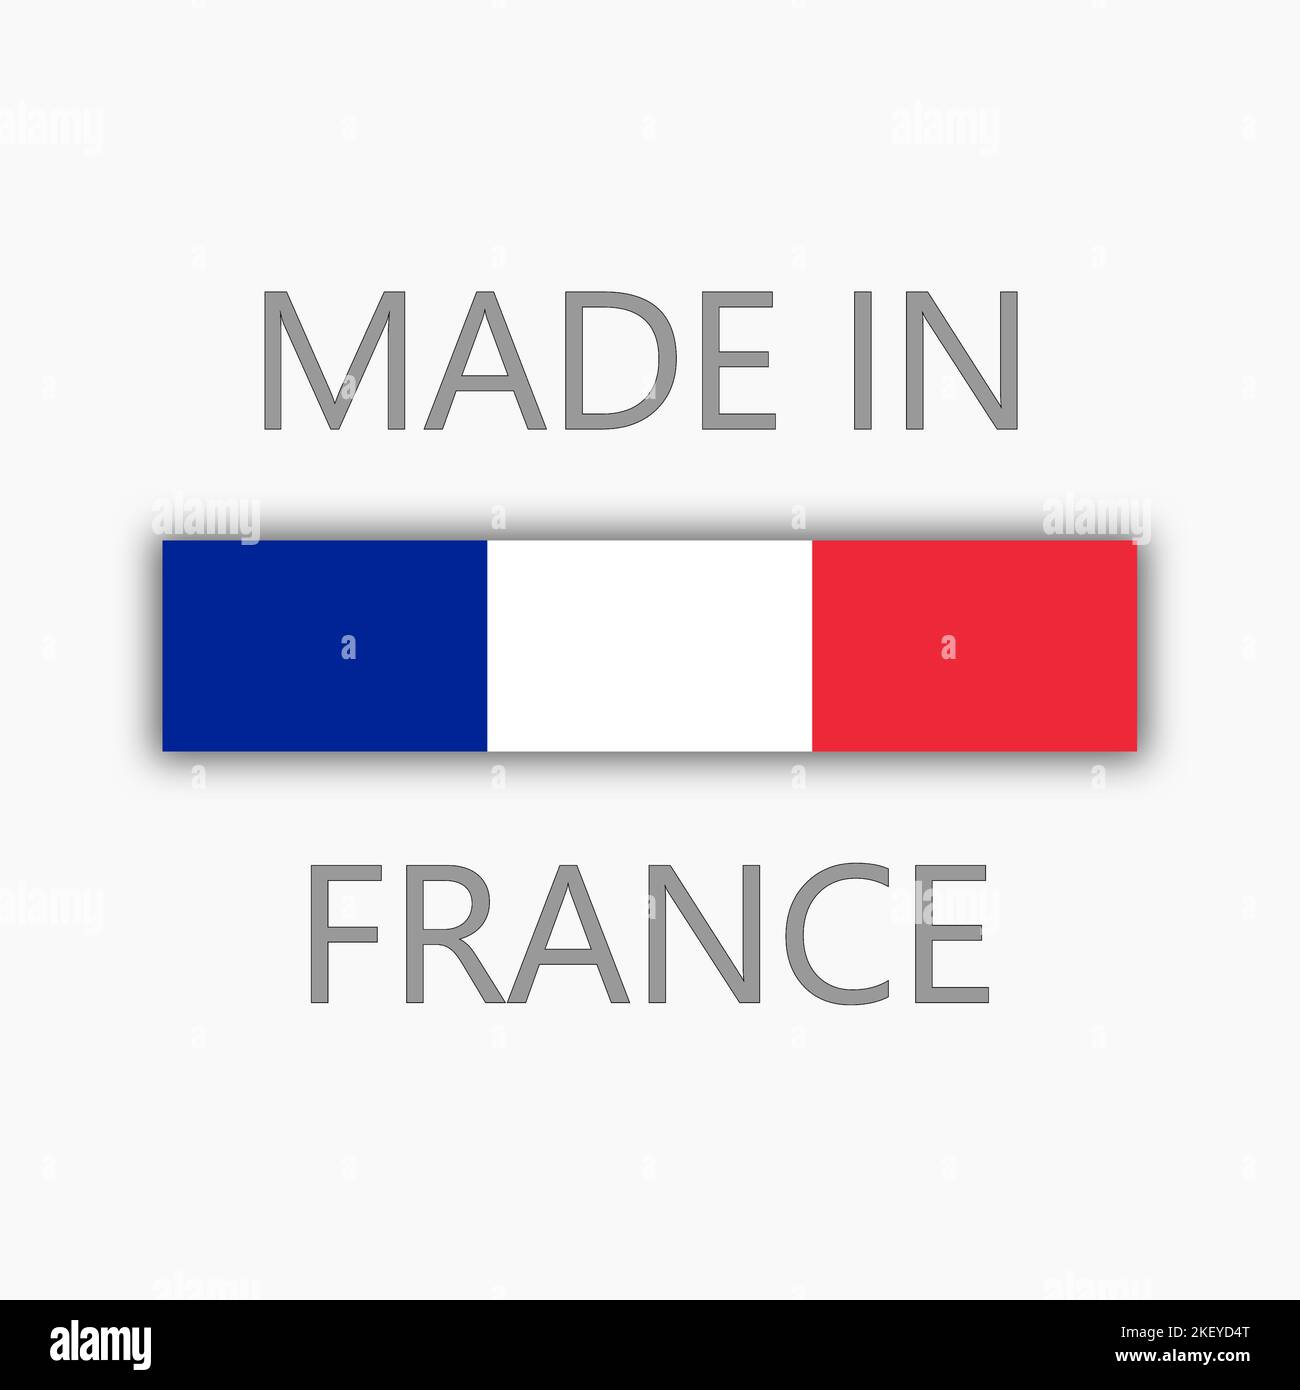 Made in France vector illustration. Stock Vector